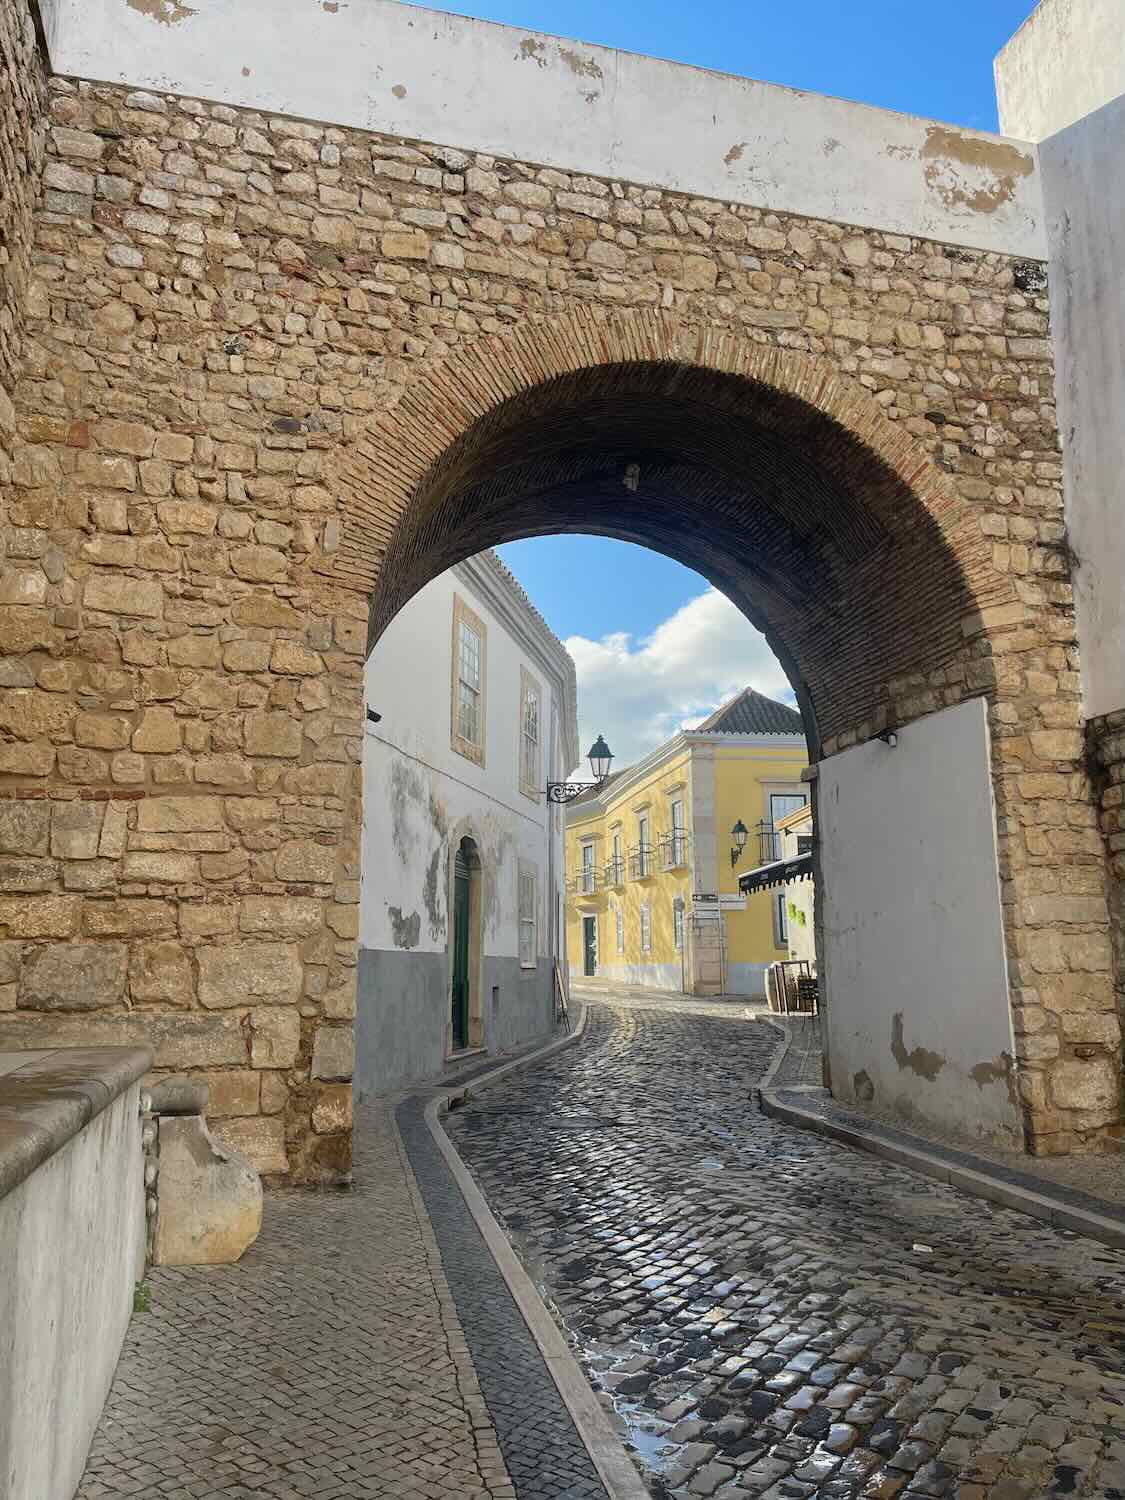 A tranquil street in Faro's old town, showcasing a stone archway leading to historic, colorful buildings and a cobblestone street reflecting the soft light.